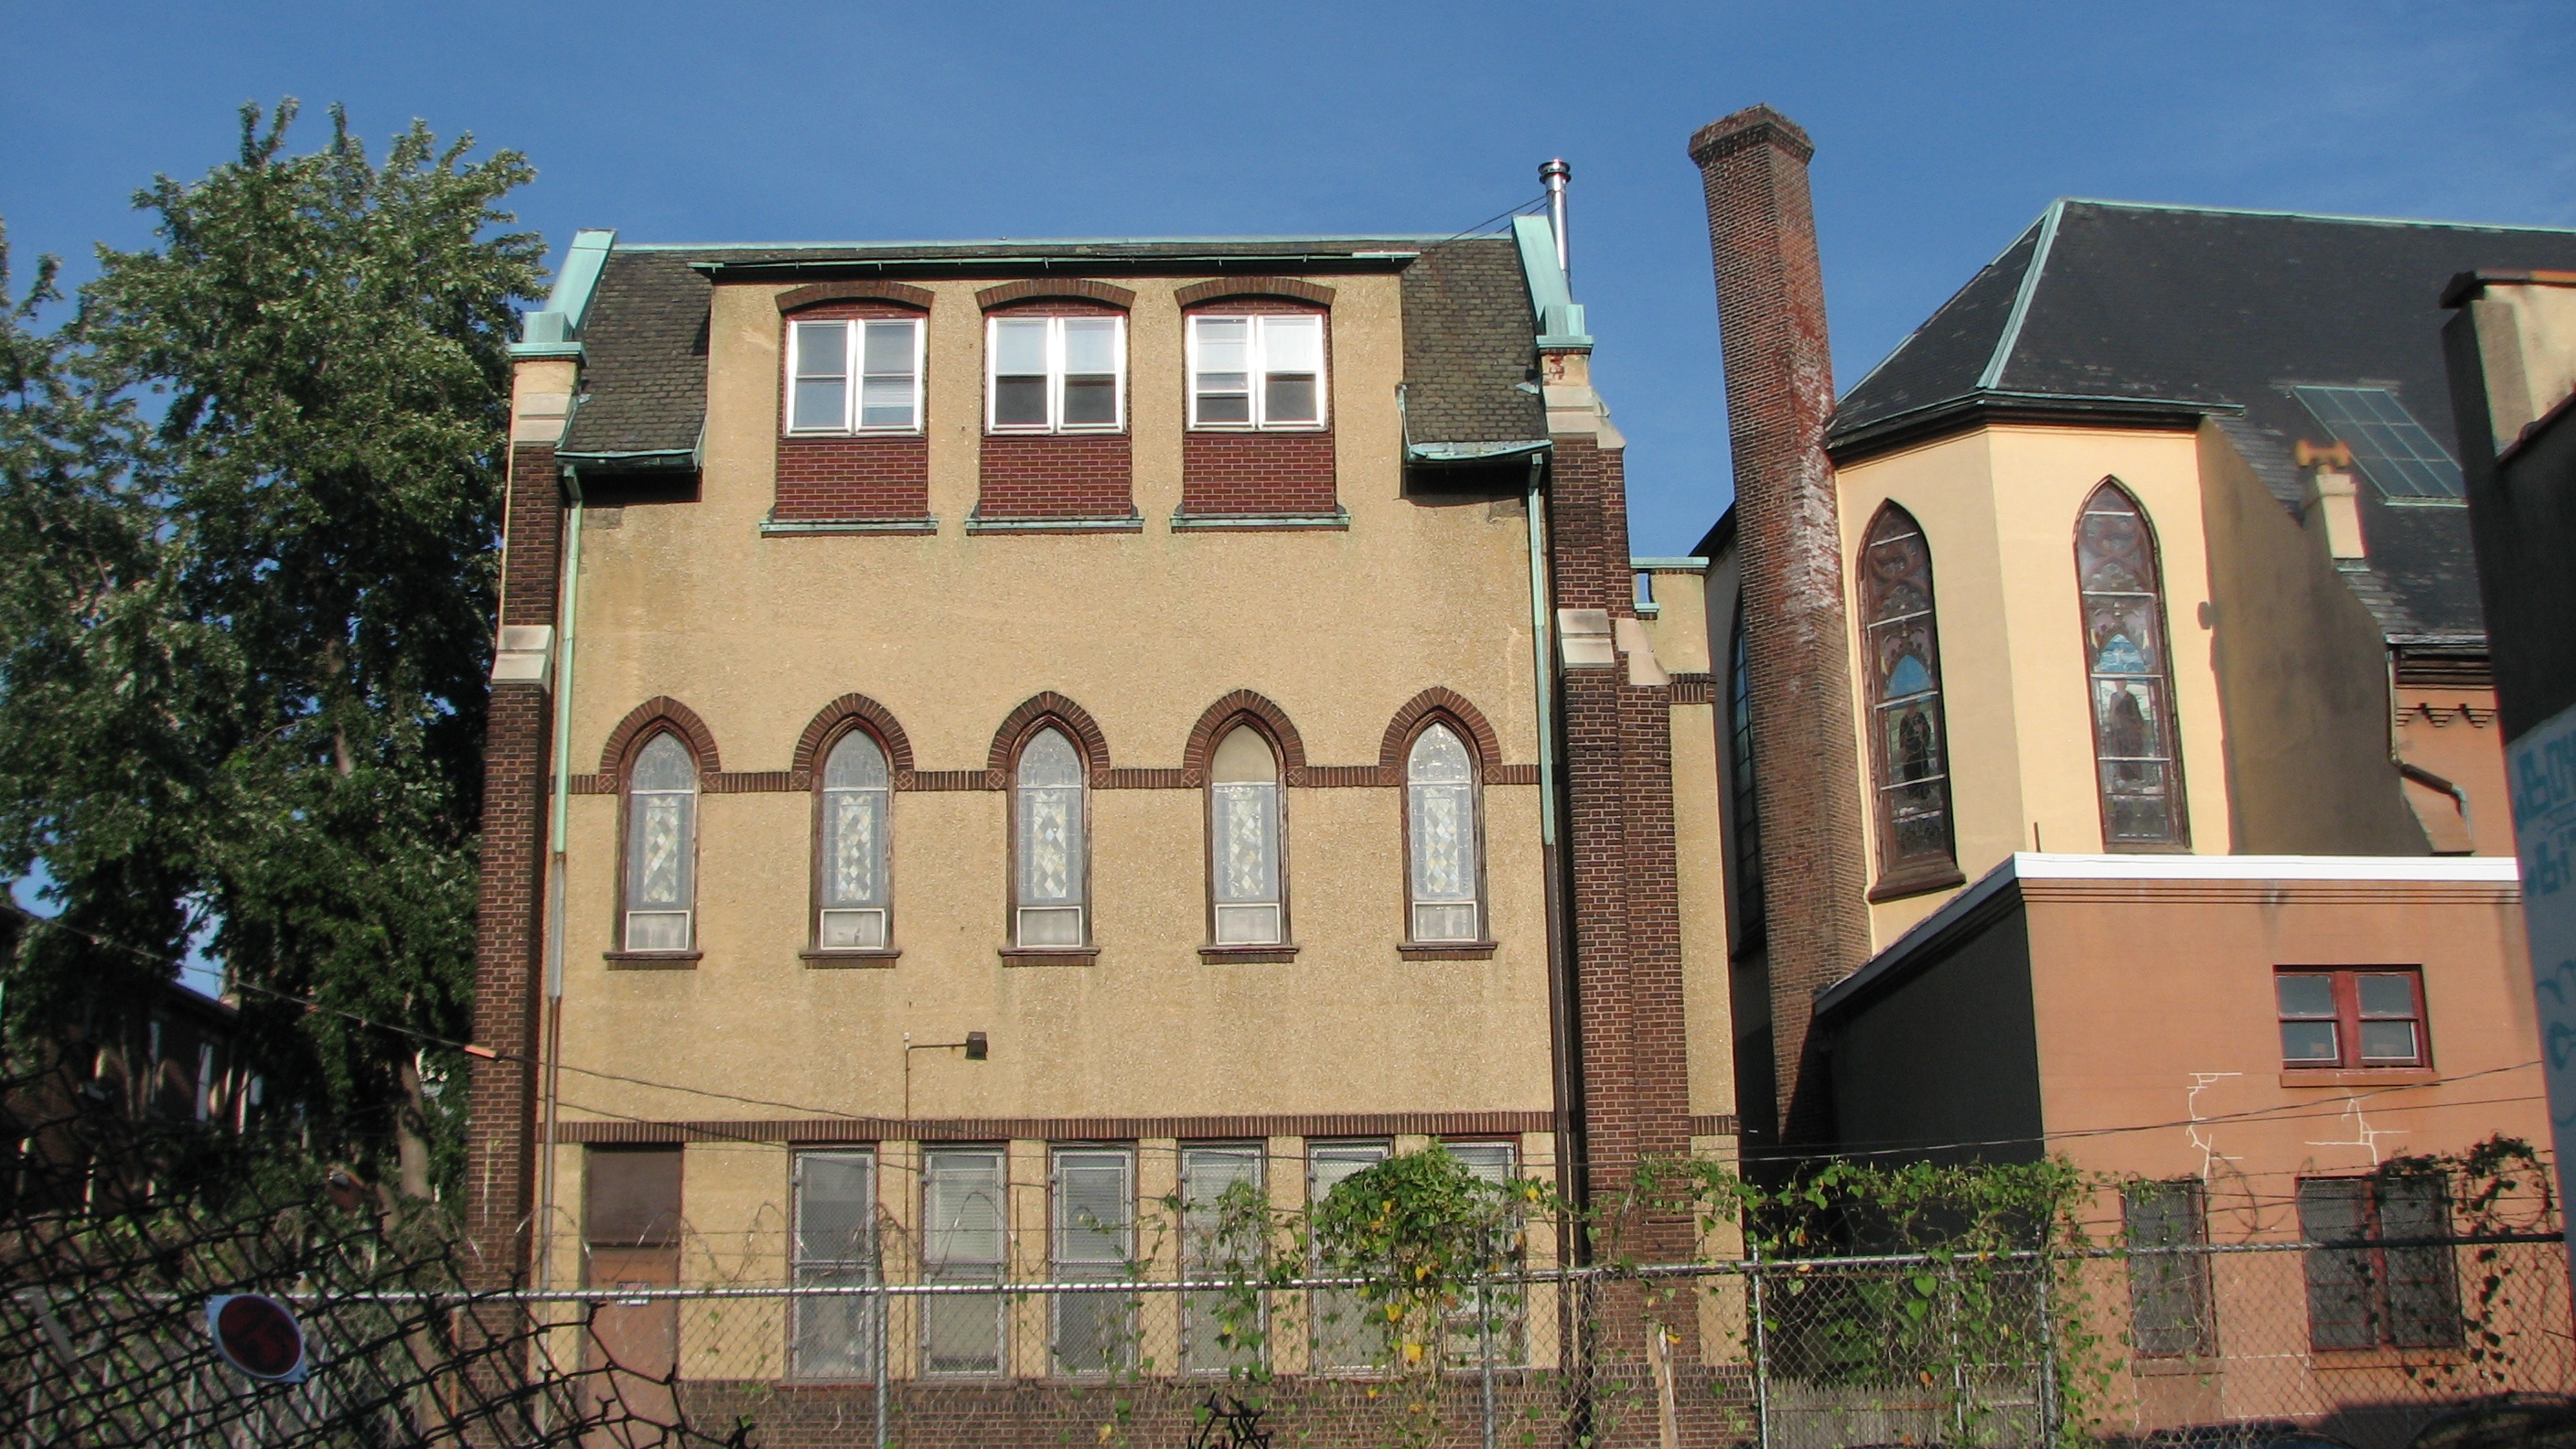 The former convent sits behind the church on Brandywine Street.